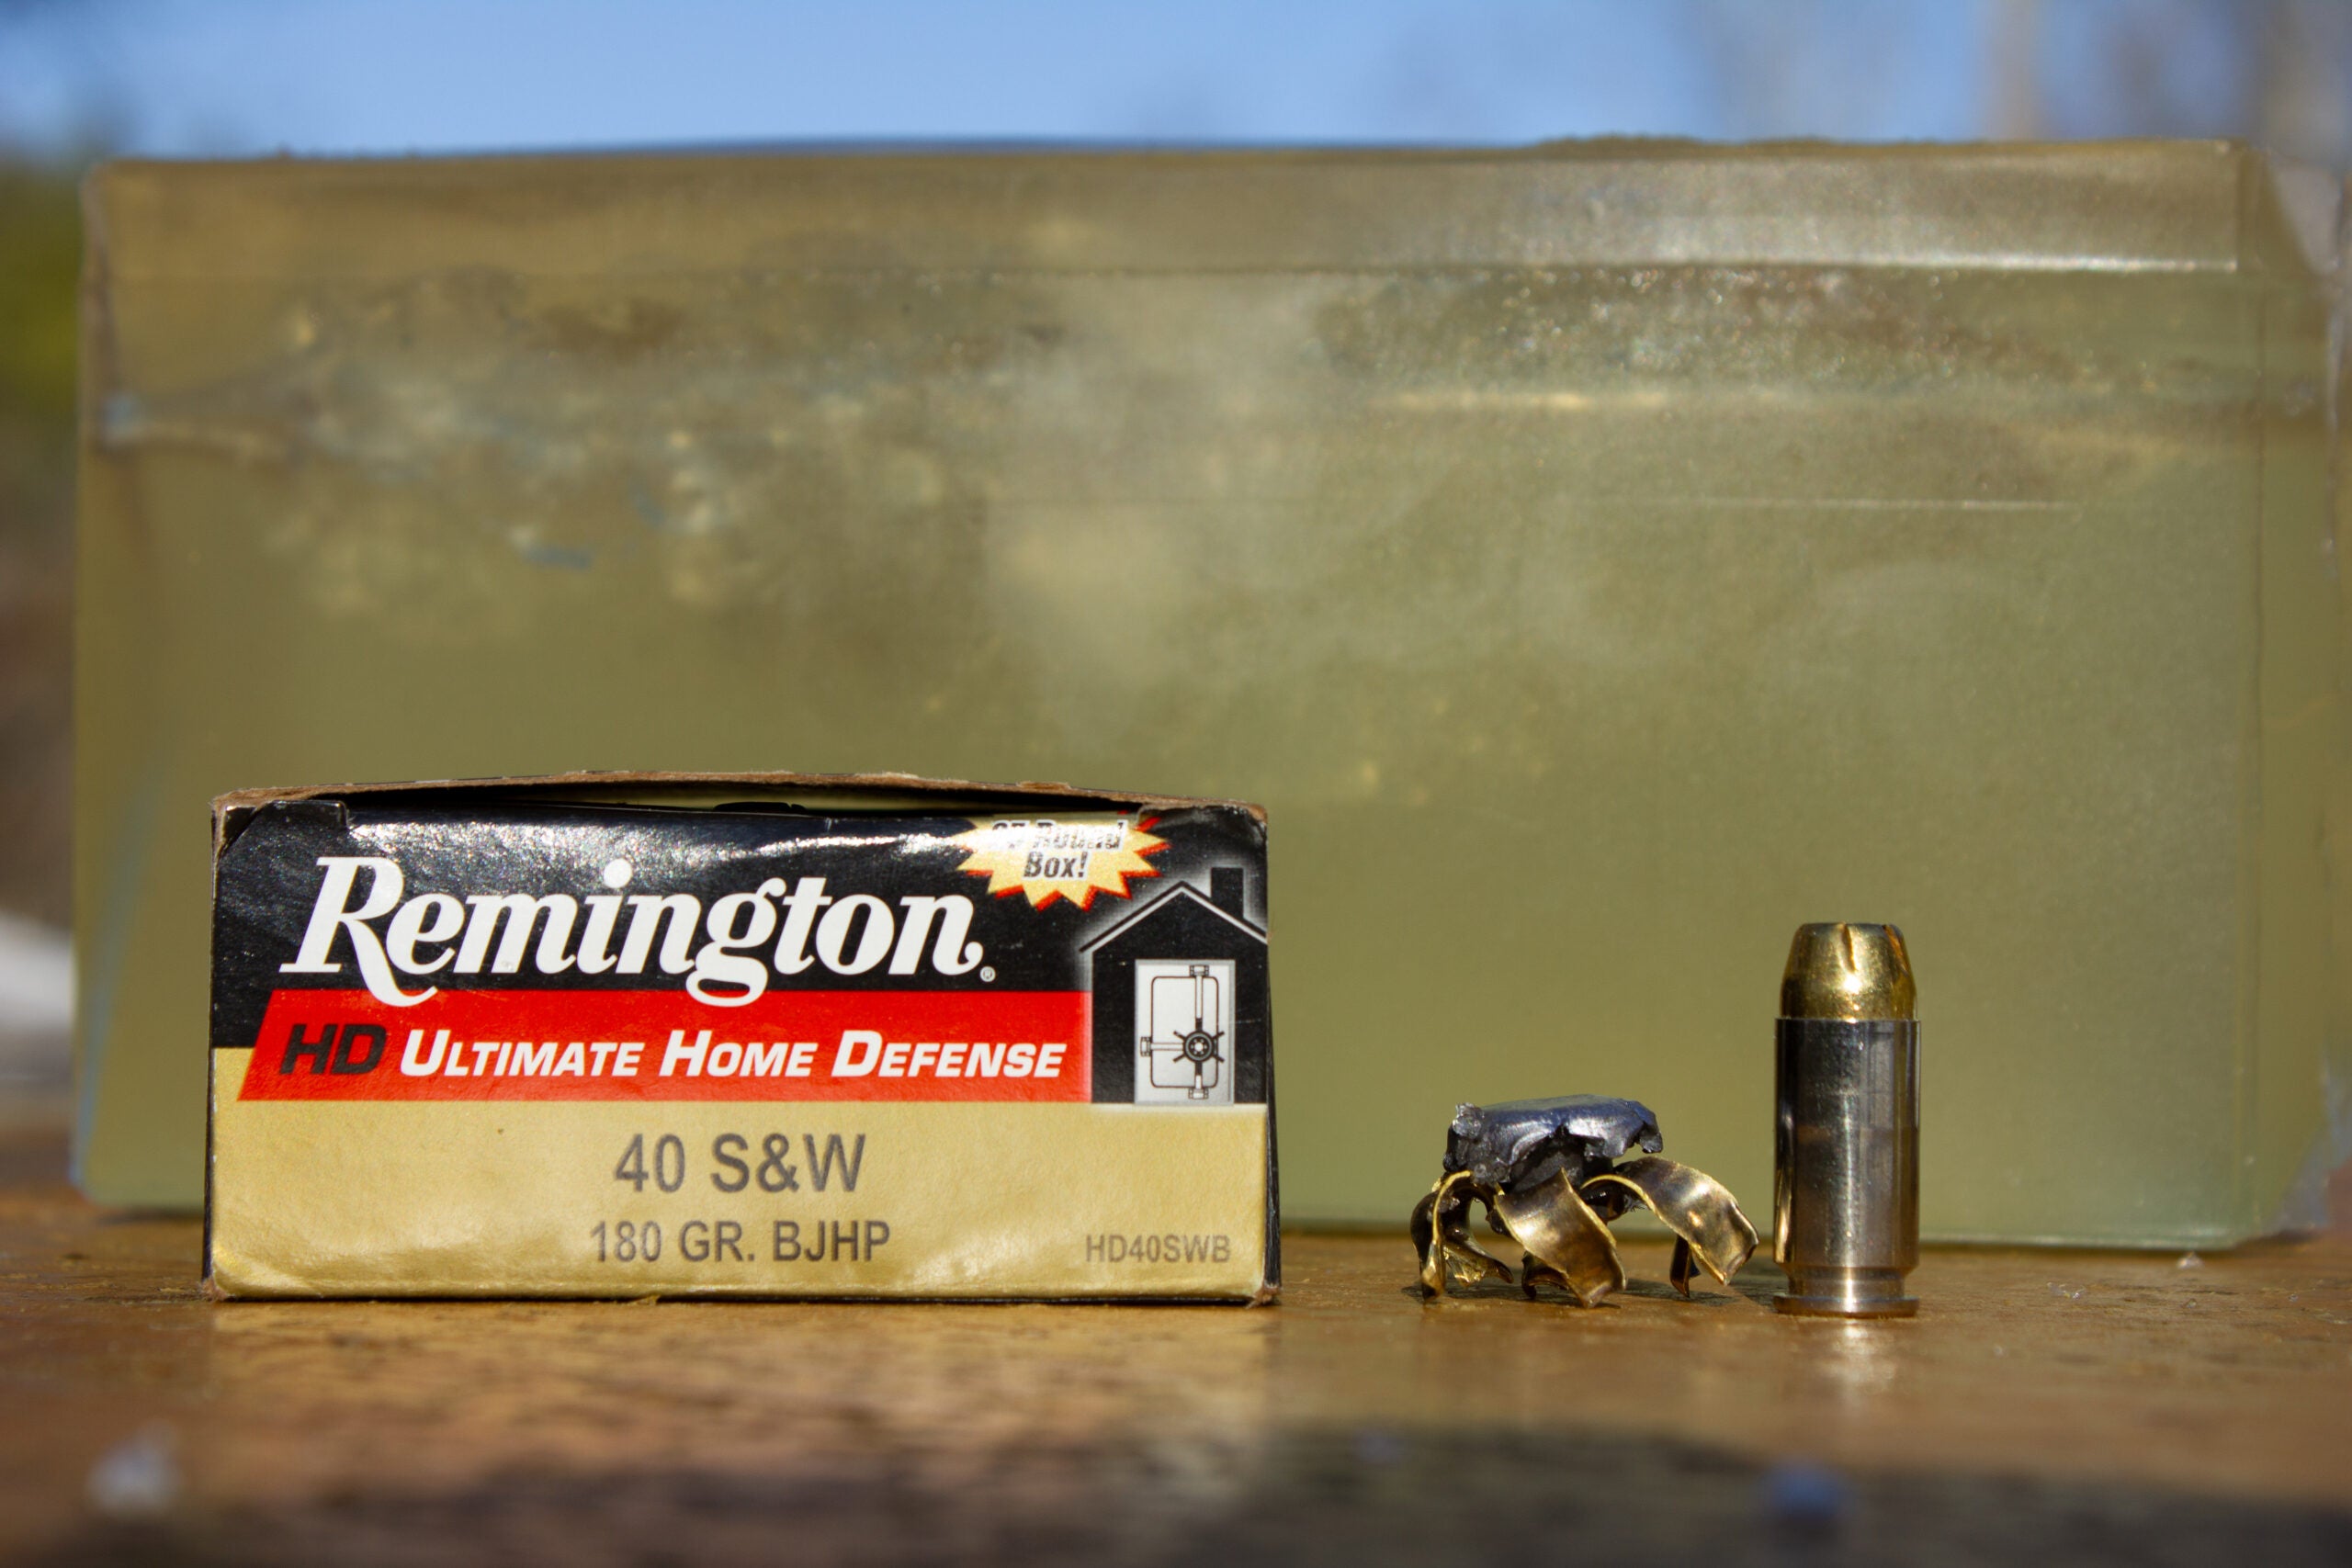 Box of 40 S&W ammo, a fired bullet, and unfired cartridge sit in front of a block of ballistics gel